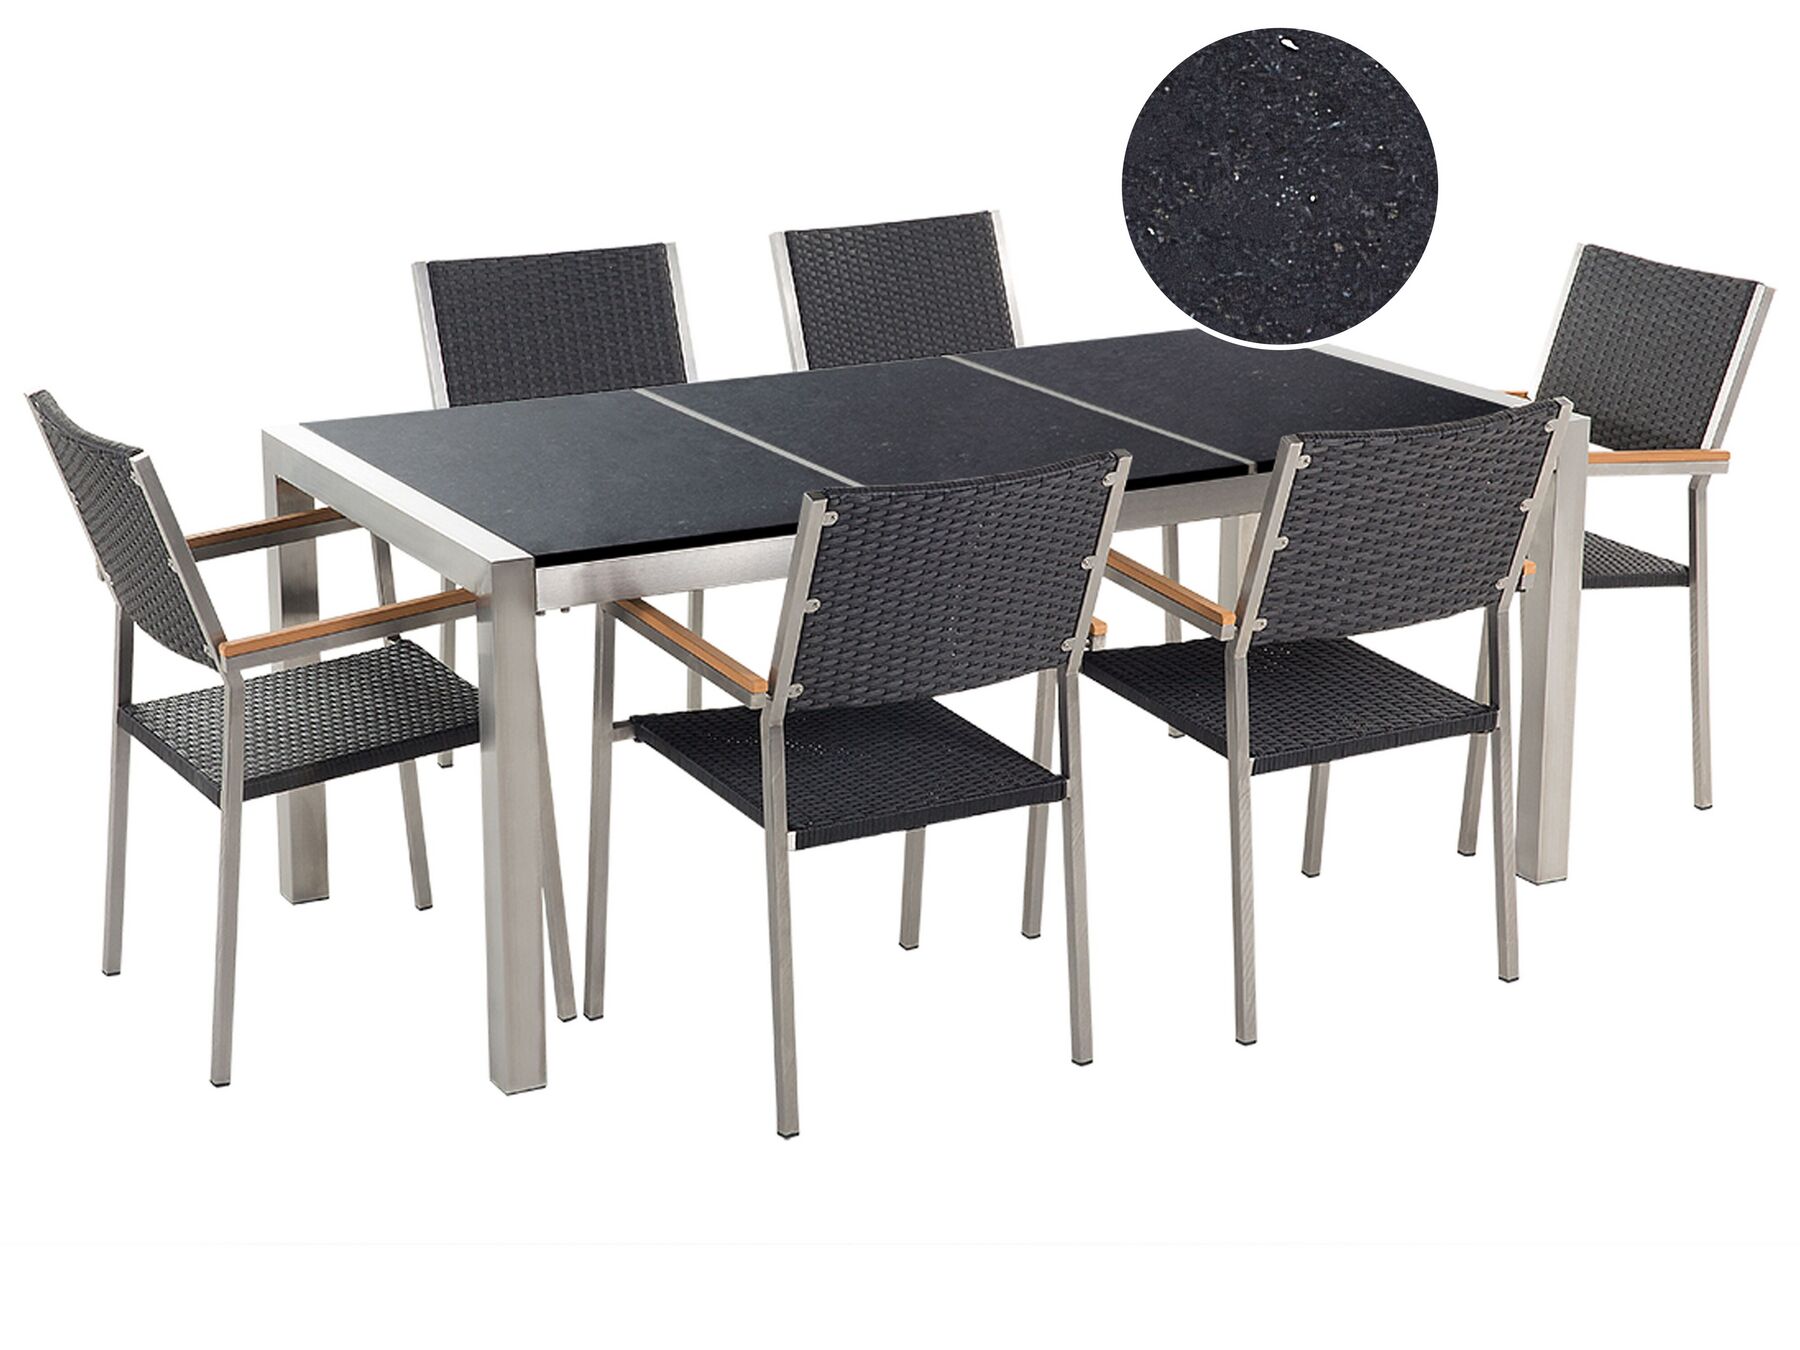 6 Seater Garden Dining Set Black Granite Triple Plate Top with Black Rattan Chairs GROSSETO_465033